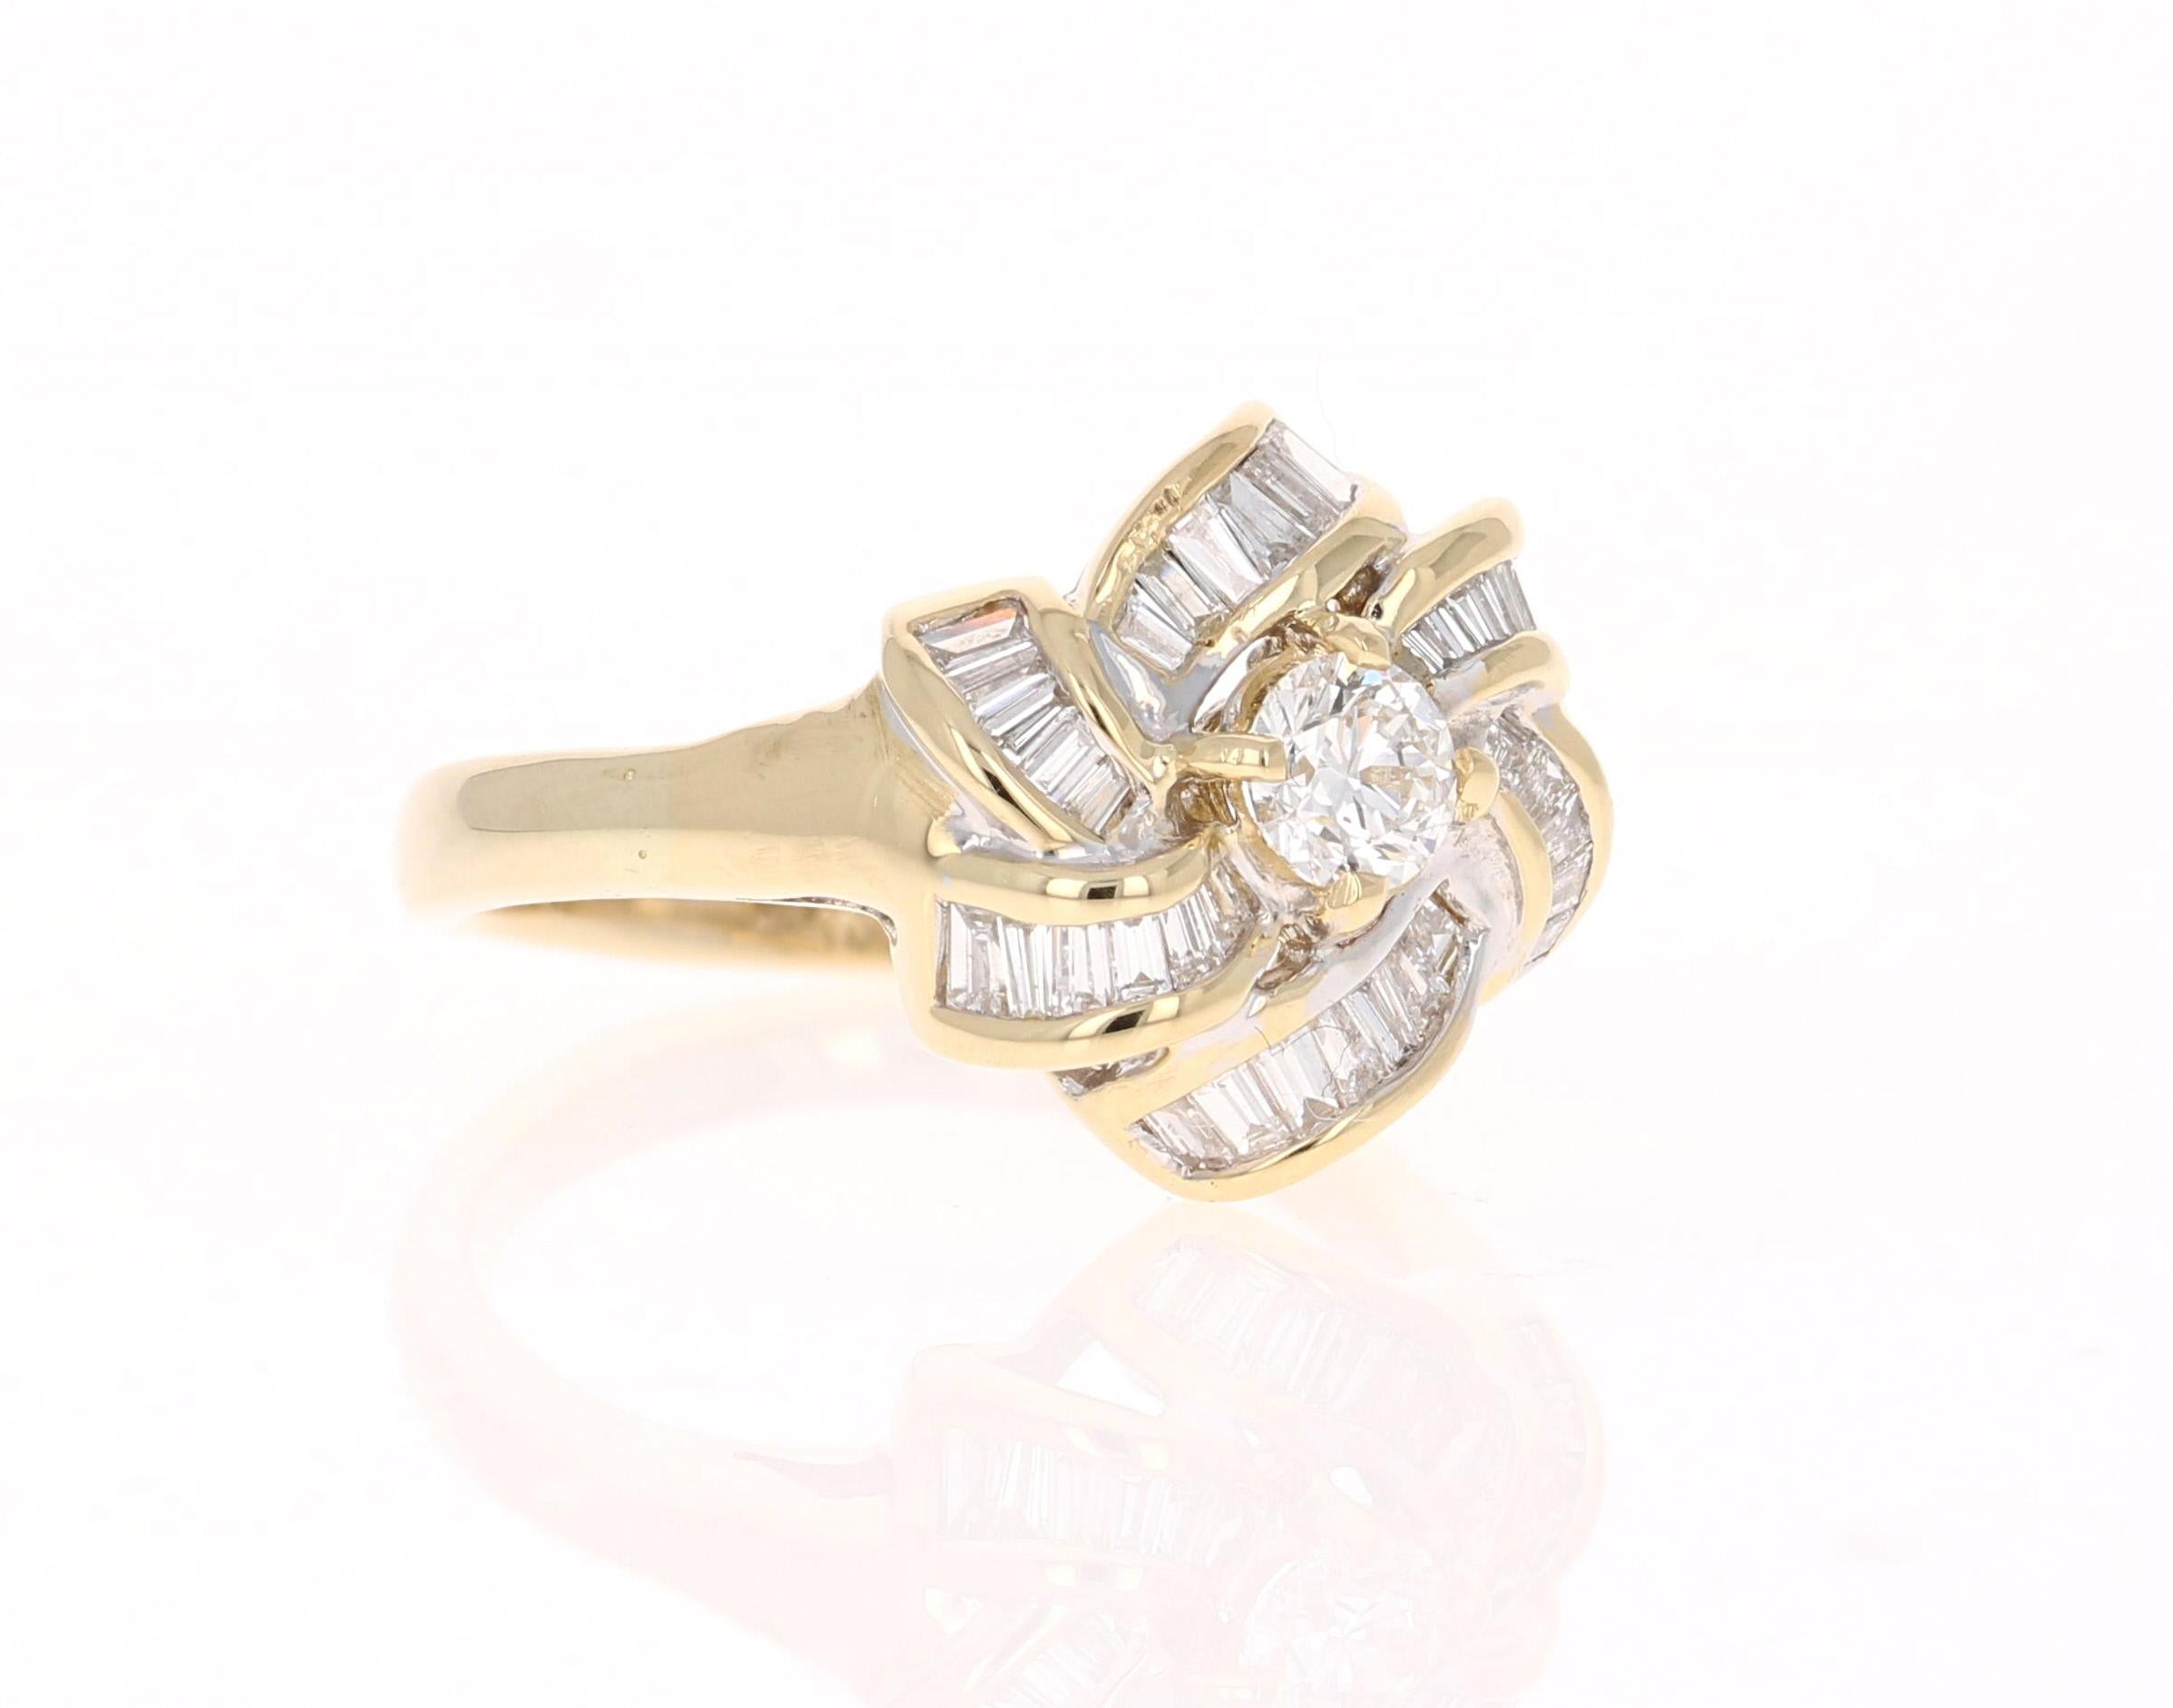 Classy Baguette and Round Cut Diamond Cluster Ring

This ring has a round cut diamond weighing 0.37 Carats. It has 36 Baguette Cut Diamonds weighing 0.95 Carats. The total carat weight of the ring is 1.32 Carats. 

Crafted in 14 Karat Yellow Gold